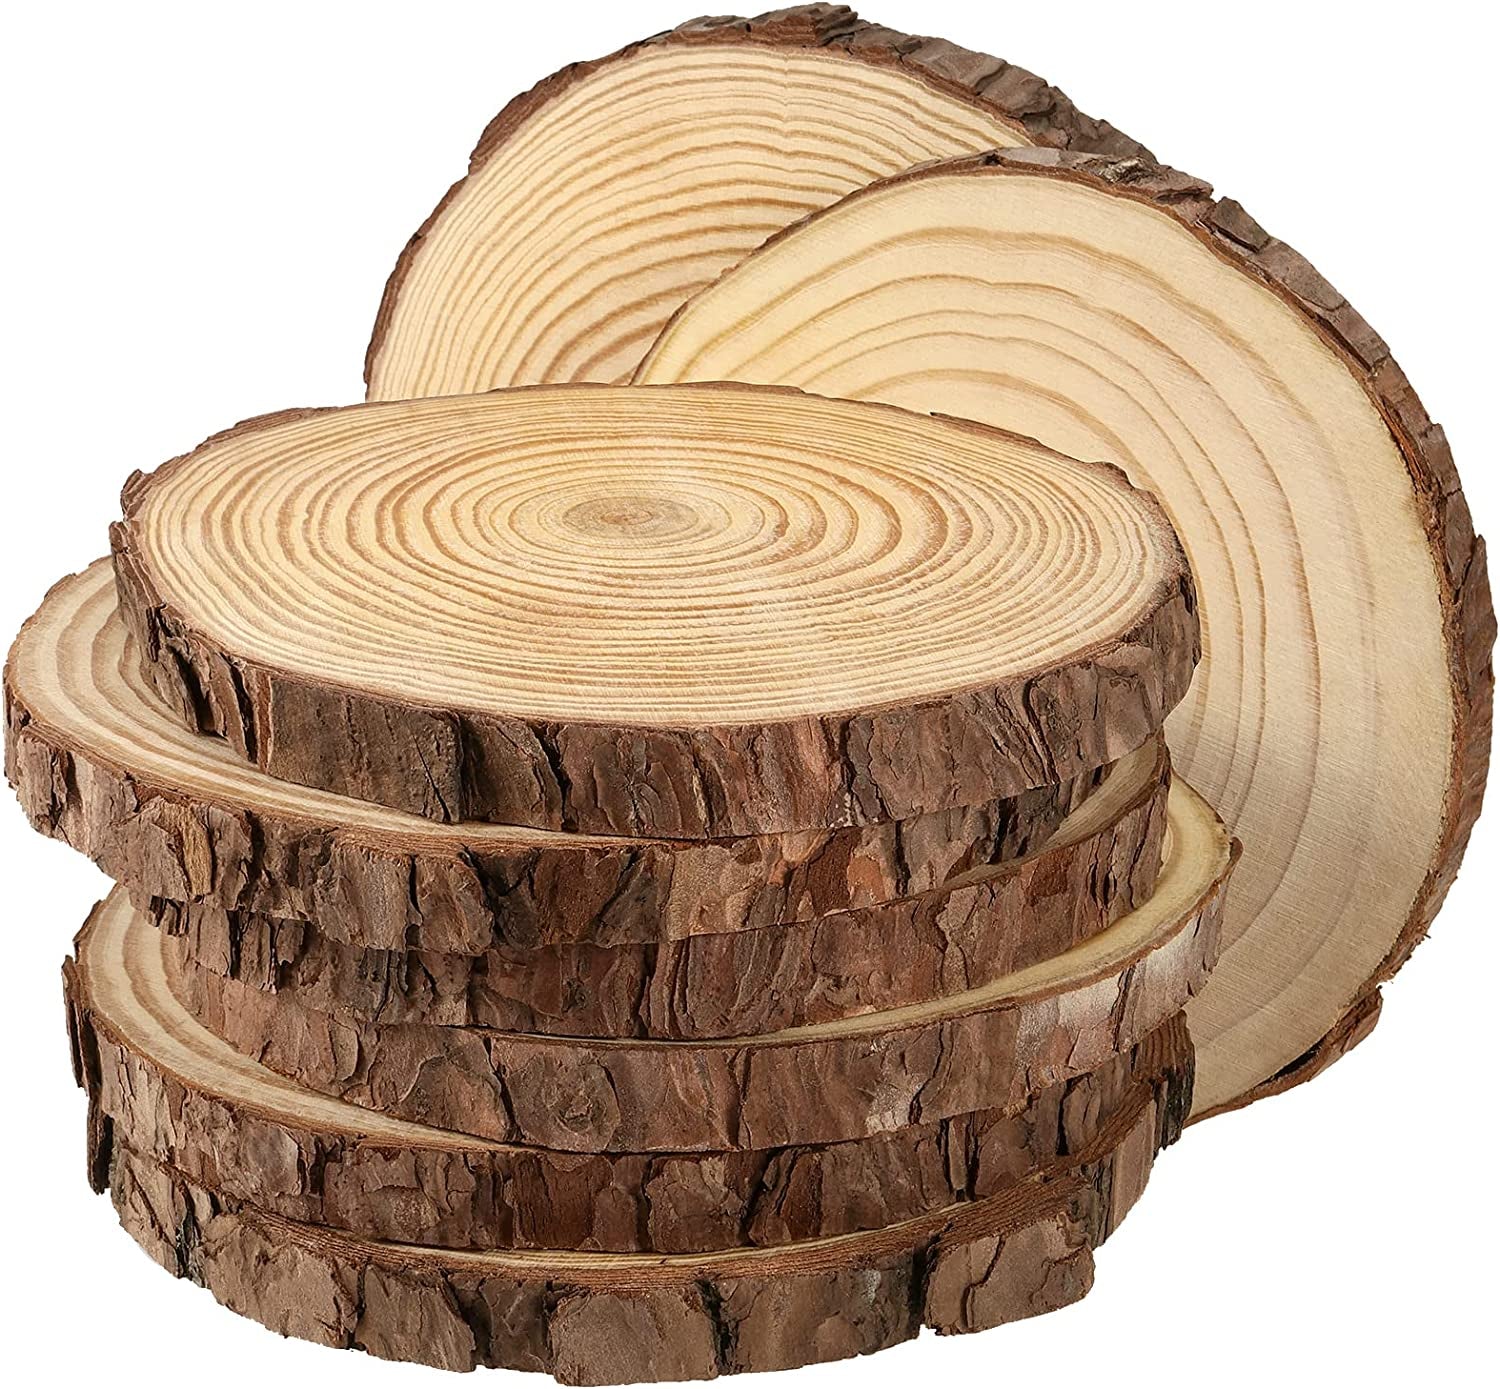 8 PCS 7-7.9 Inches Natural Unfinished Wood Slices, round Wooden